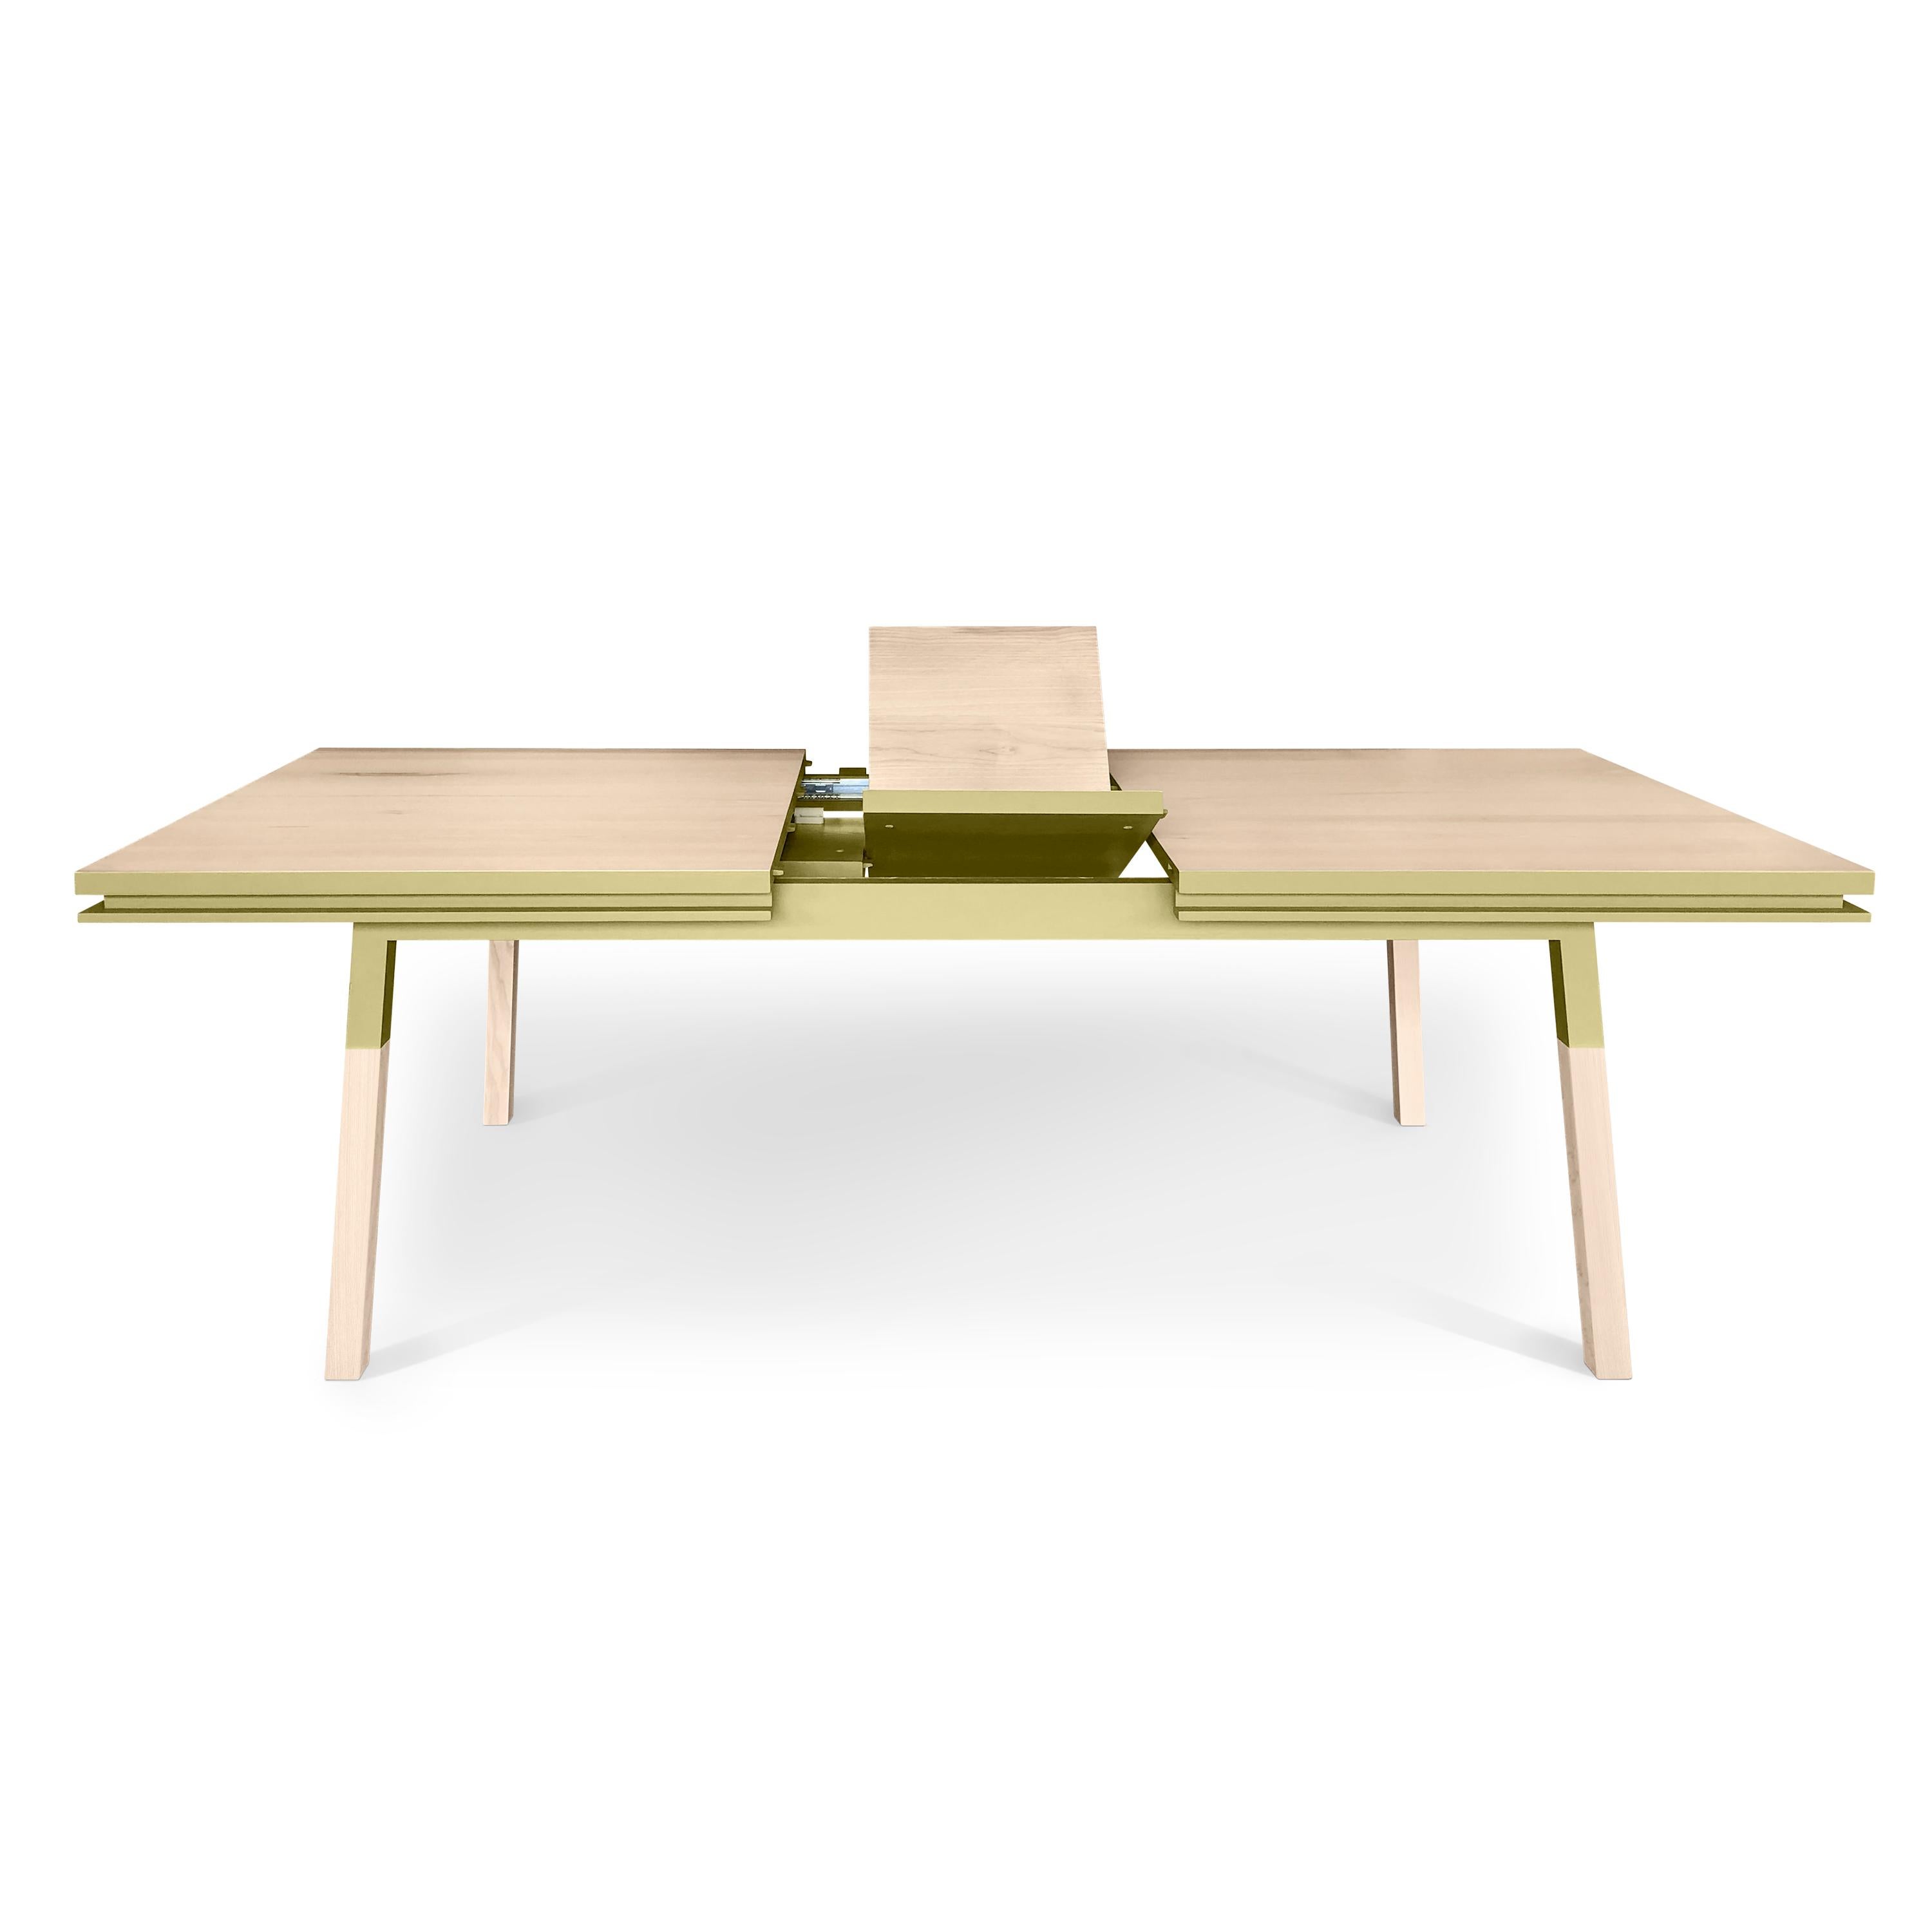 This rectangular dining table is proposed with 2 integrated and folded extensions. 

It is made of 100% solid ash wood from sustainably managed and PEFC certified French forests.

The 3 lengths are 220 cm / 86.6 in when the table is closed, 260 cm /